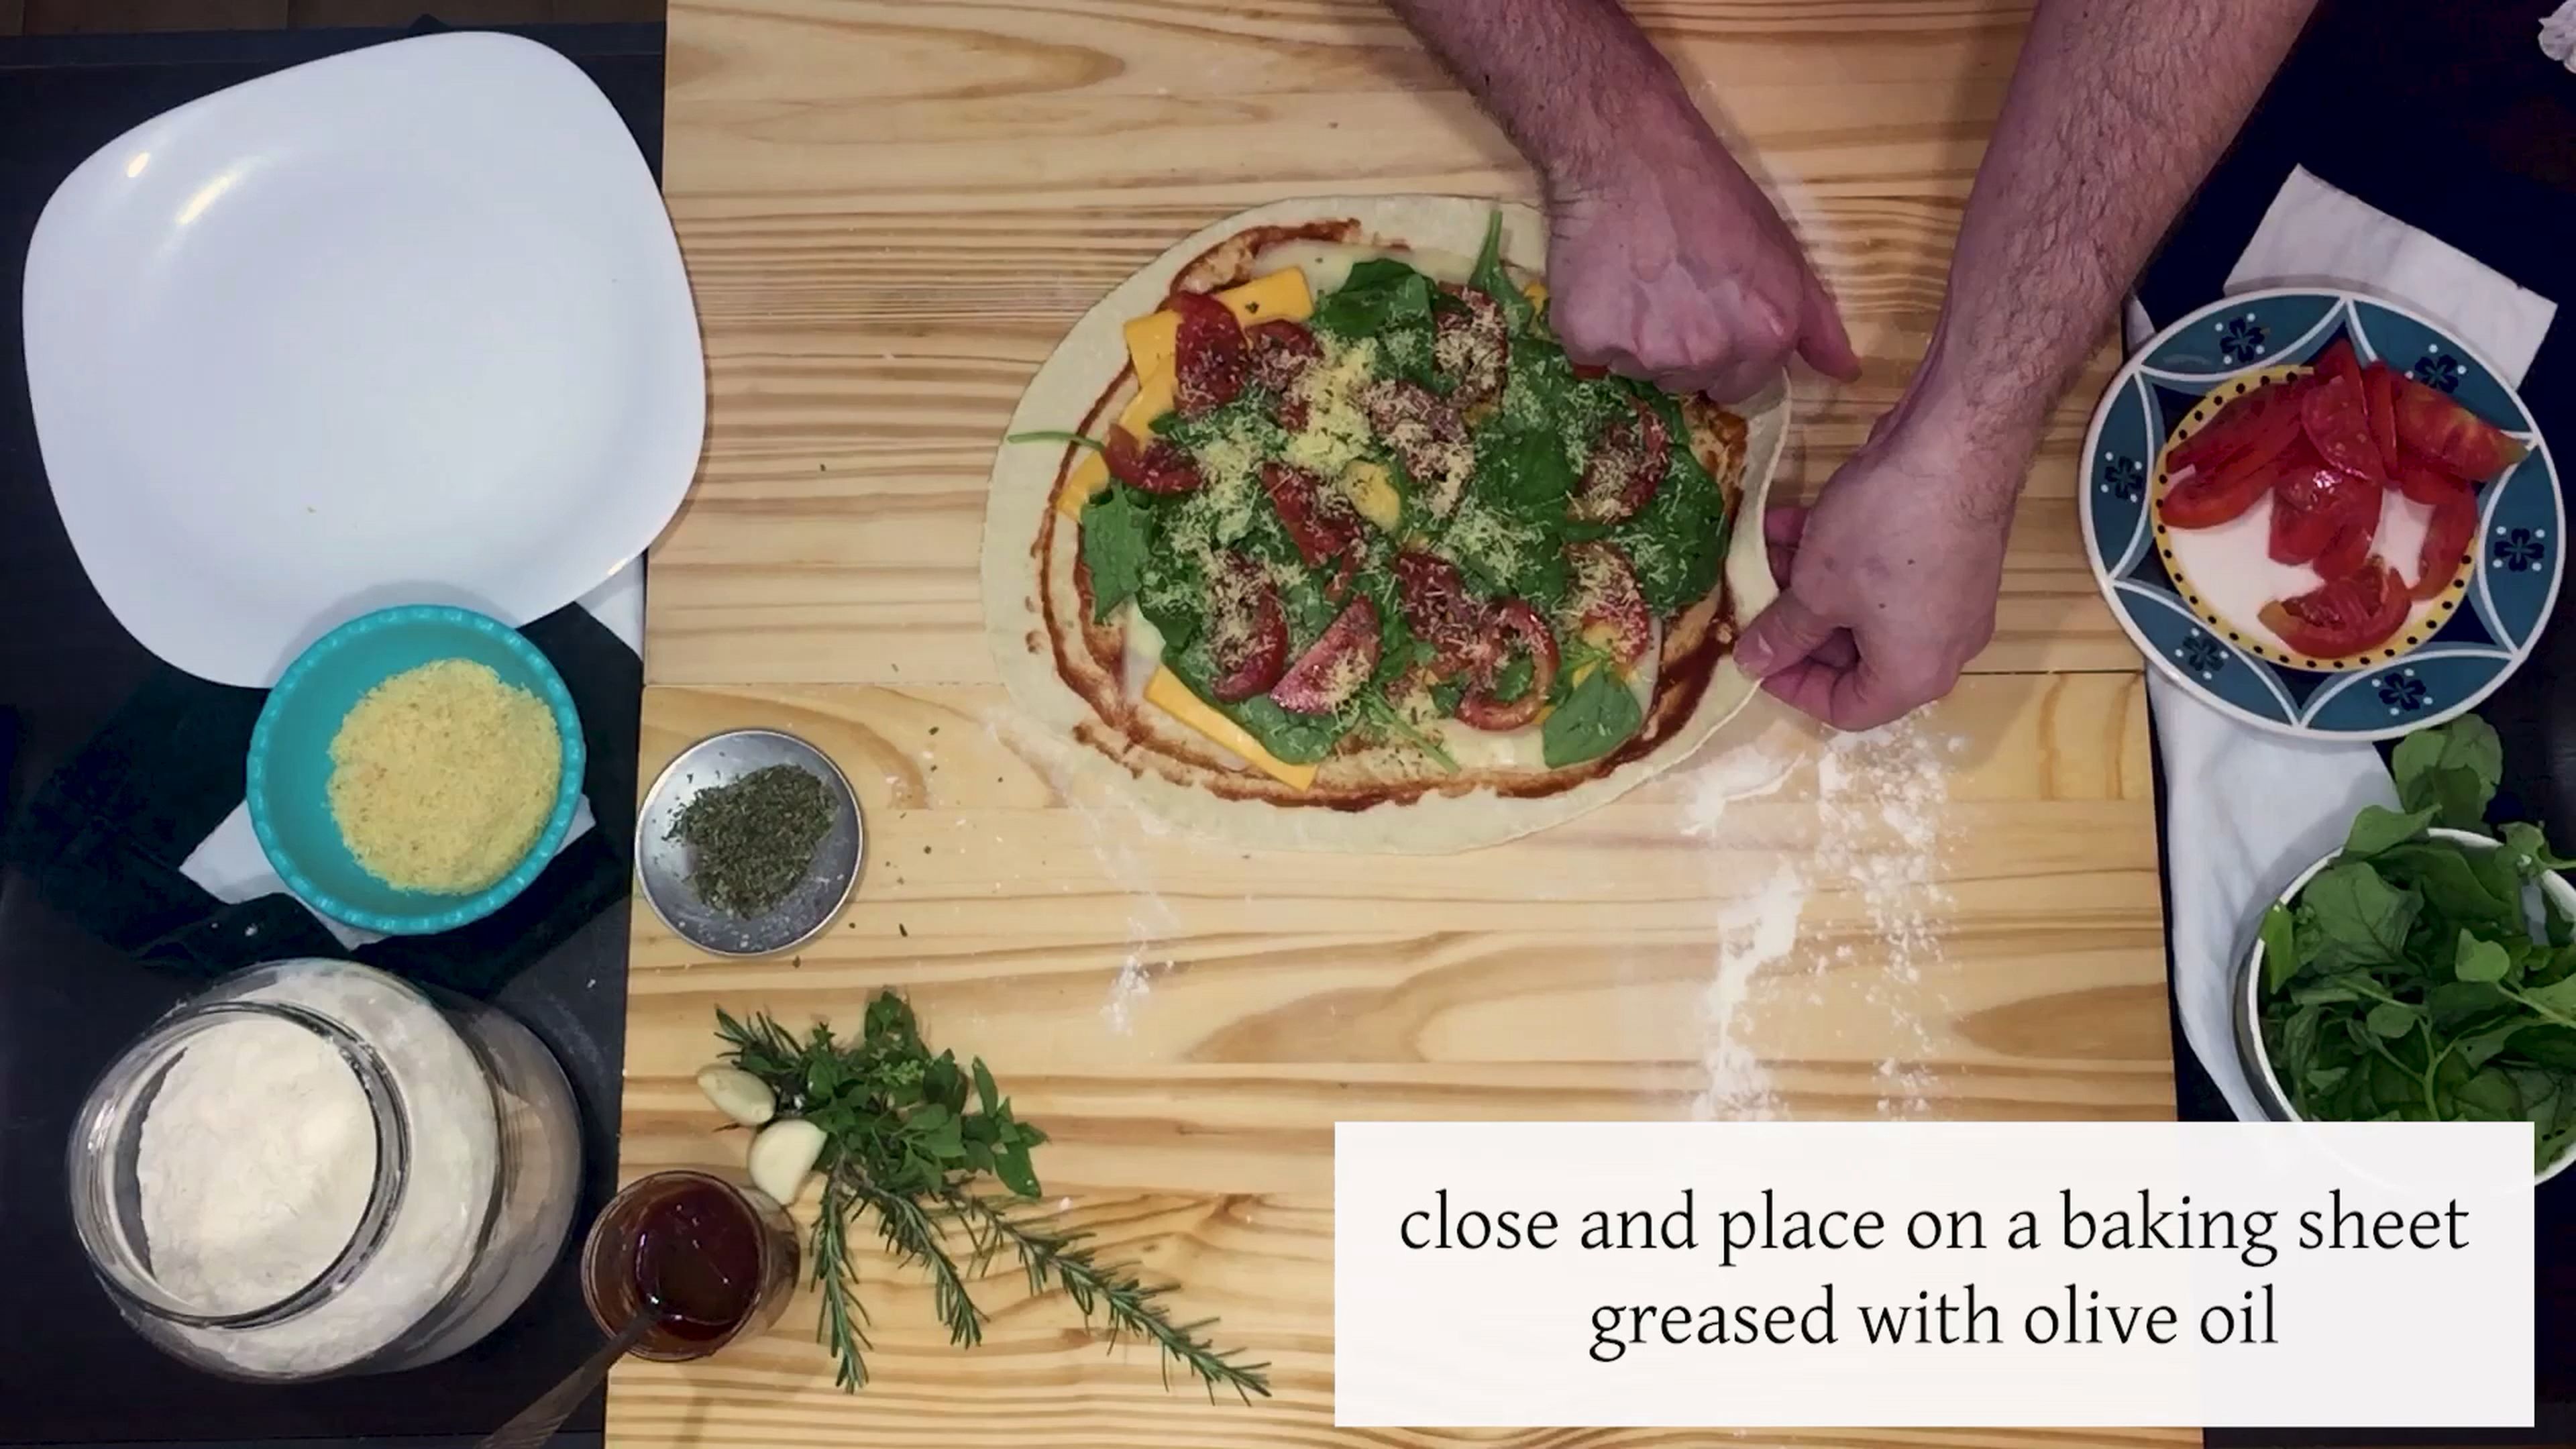 Close as shown on video; add to a greased pan with olive oil and bake at 250°C/480°F for approx. 20min